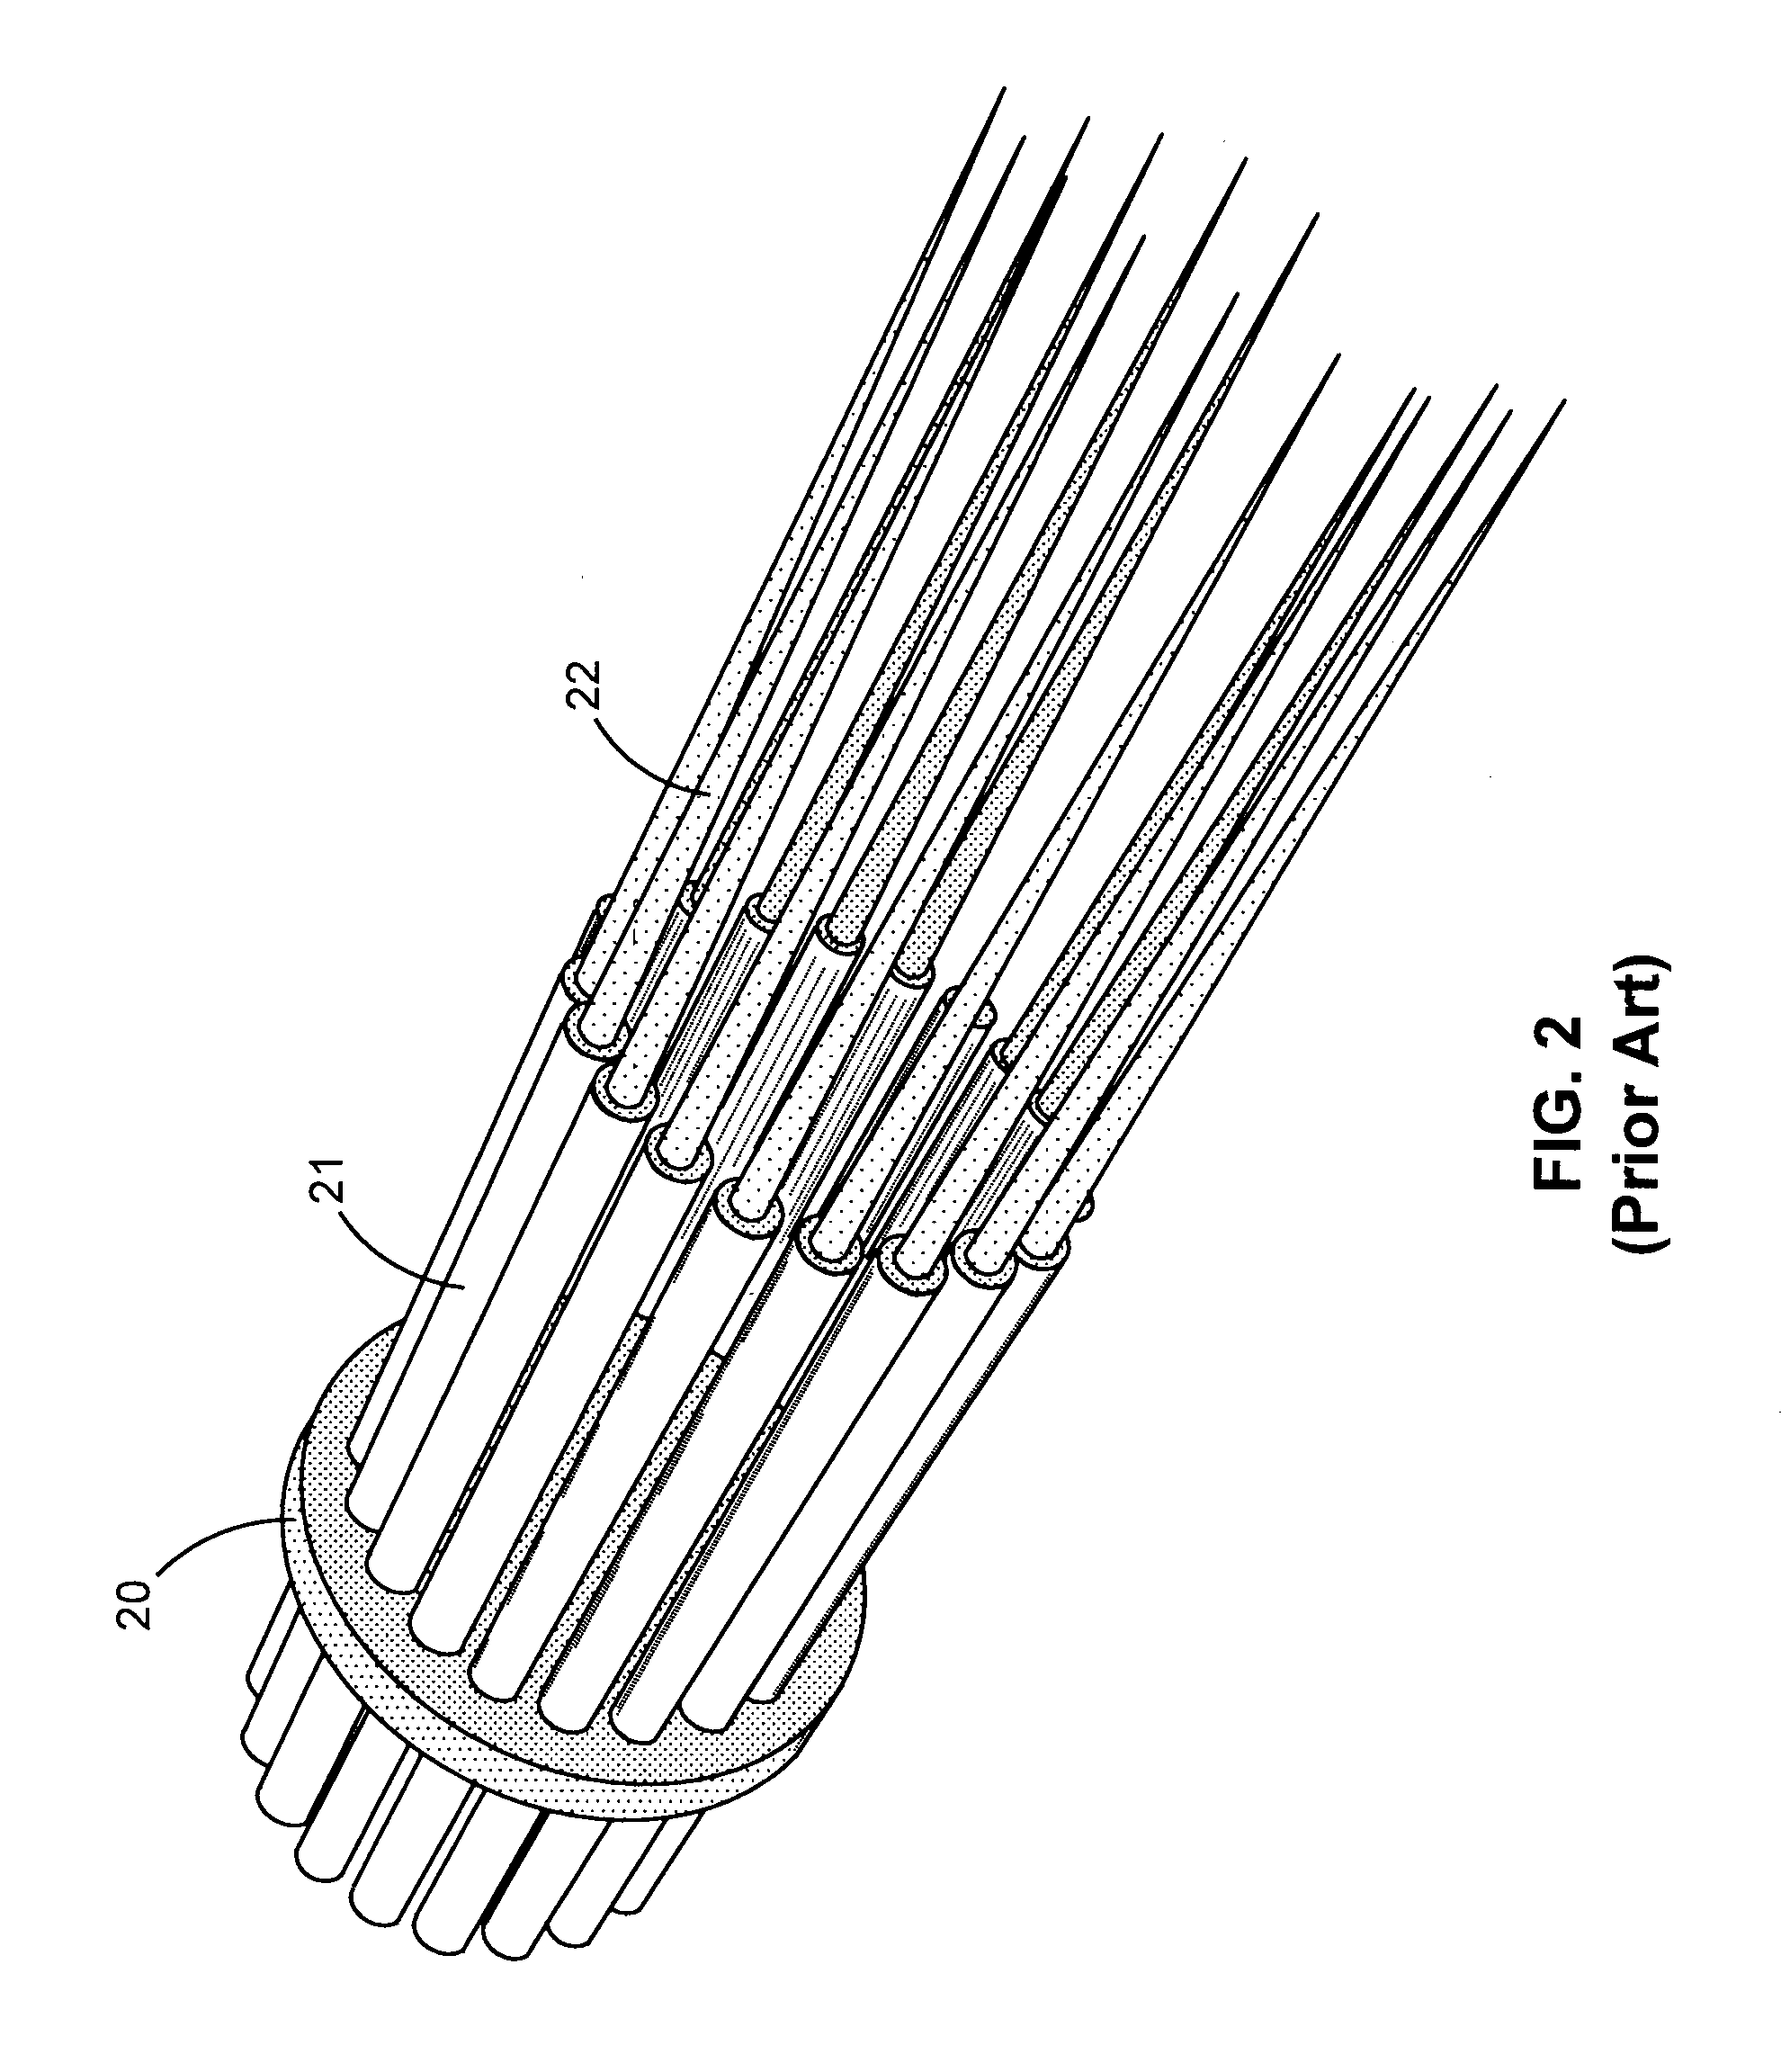 Apparatus and Methods for Pneumatically-Assisted Electrospray Emitter Array